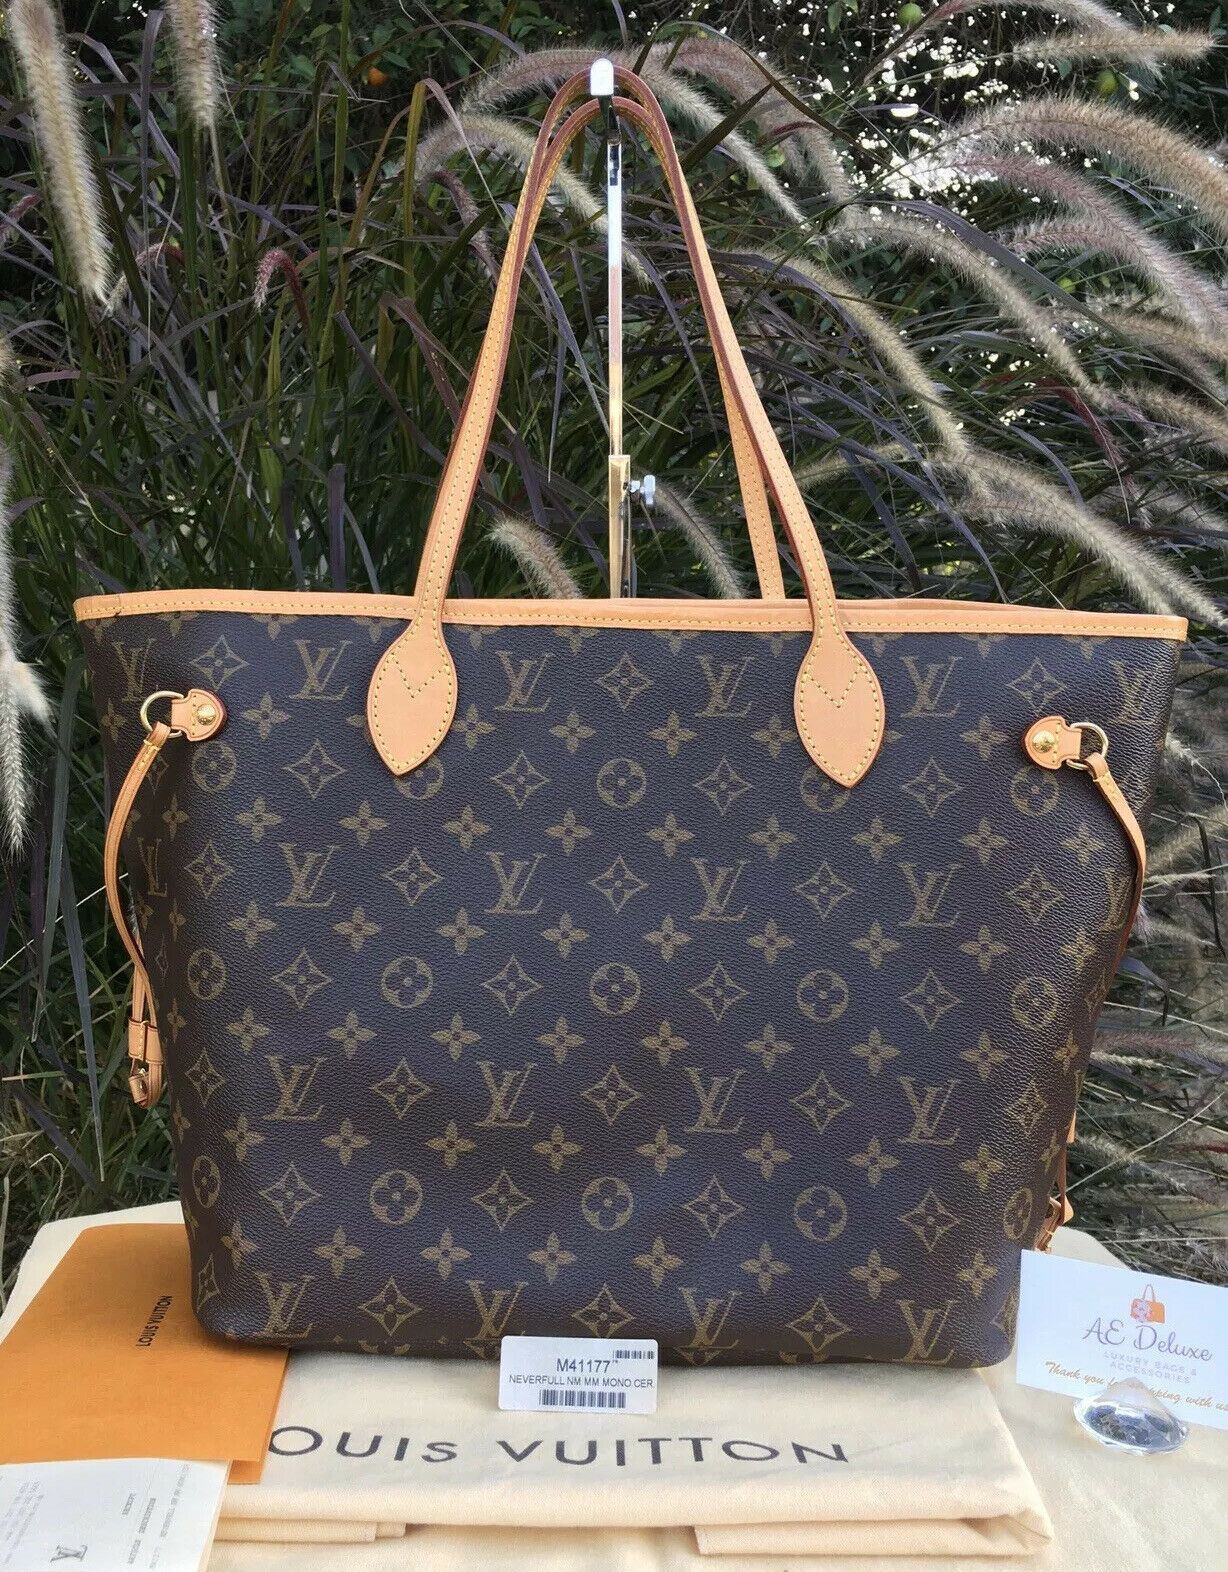 Lv Neverfull MM with Dust Bag for Sale in Lake Charles, LA - OfferUp